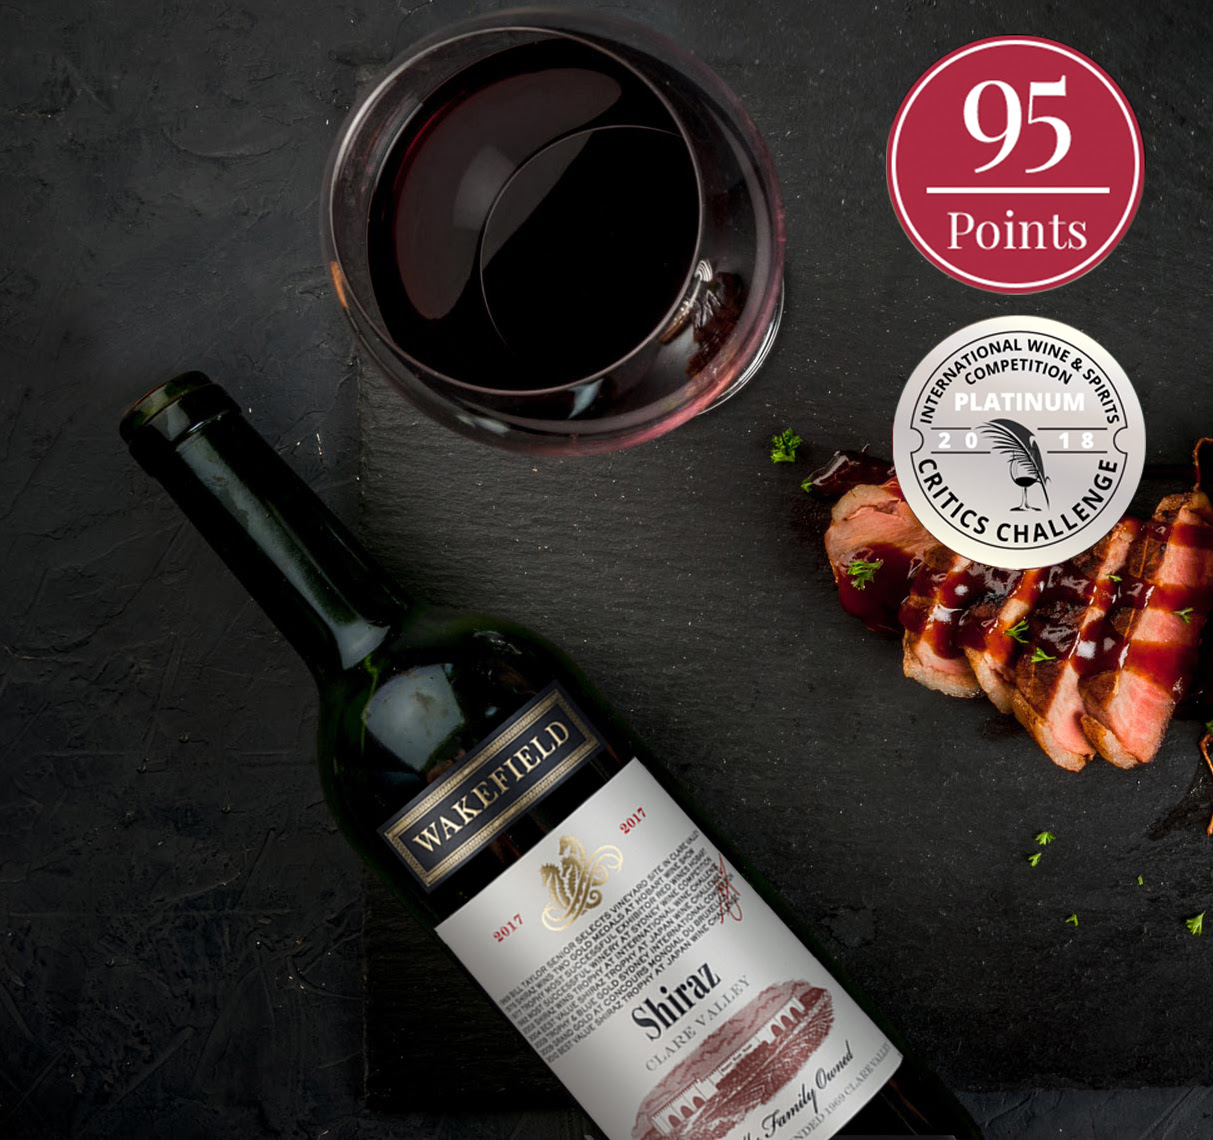 Bottle and glass of Heritage Shiraz Clare Valley by Wakefield Wines 2017  "95 Points" and "Critics Challenge" seals